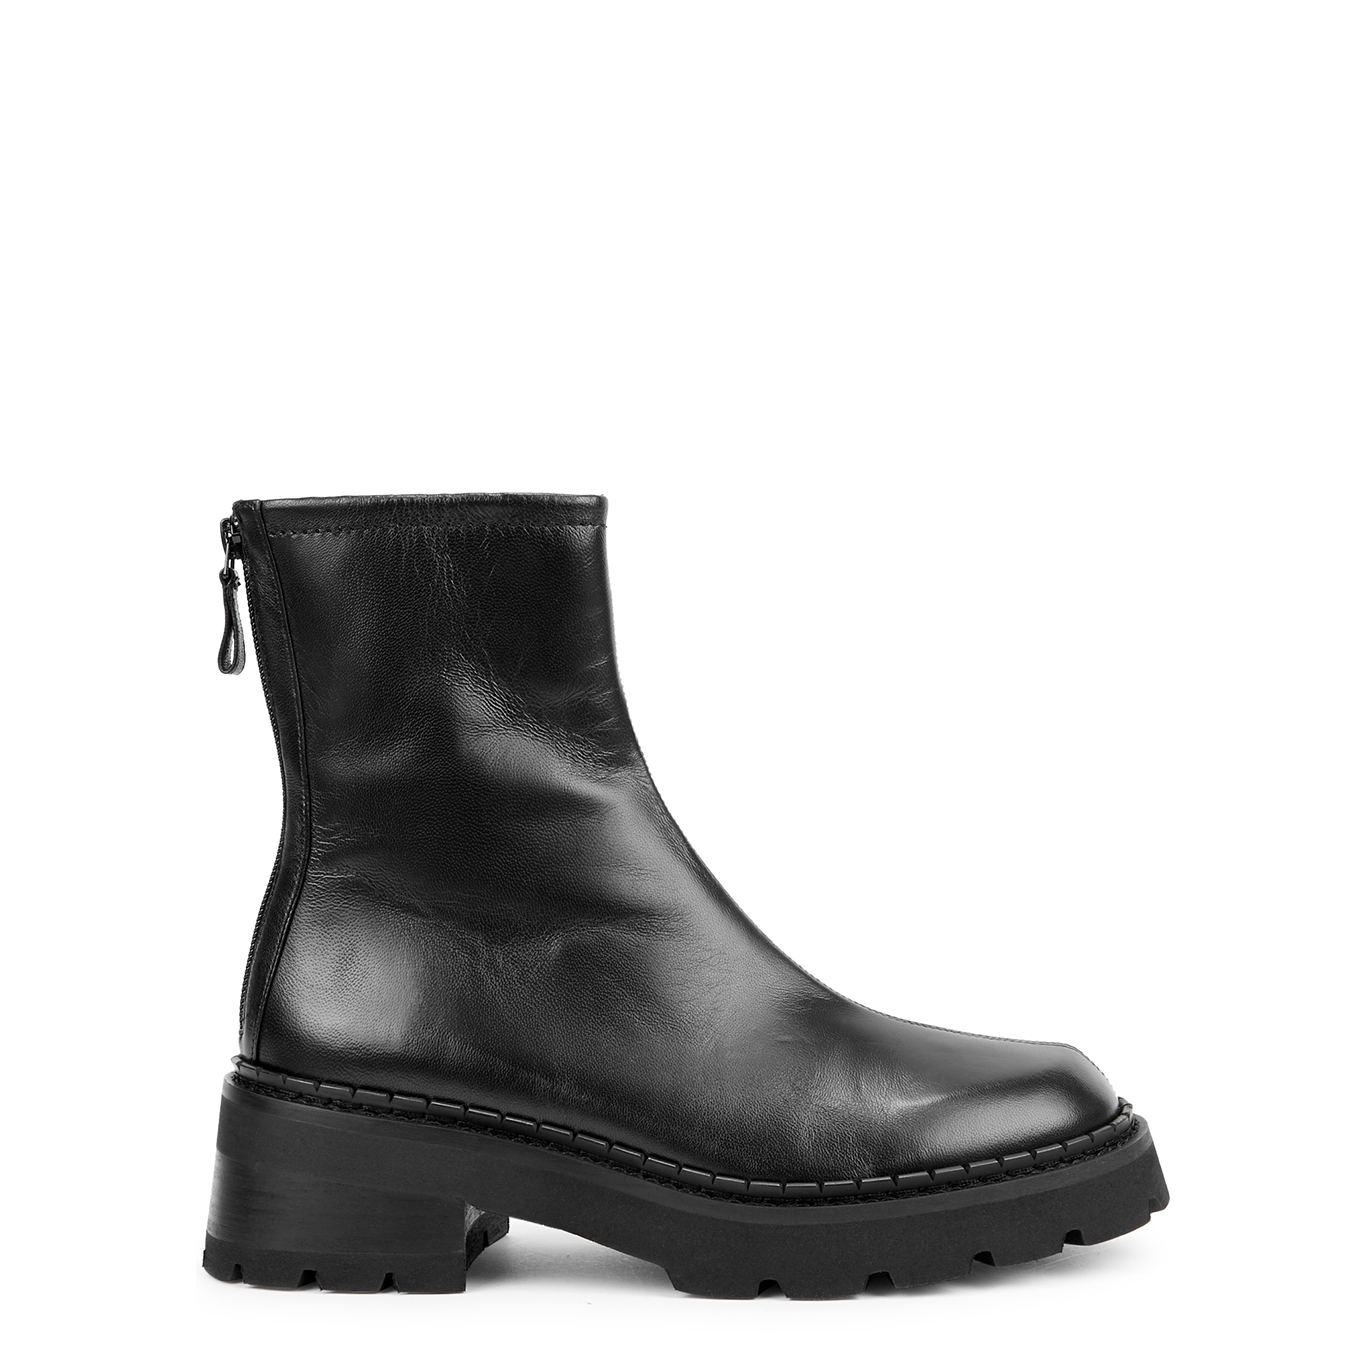 BY FAR Alistair 50 Black Leather Ankle Boots - 8